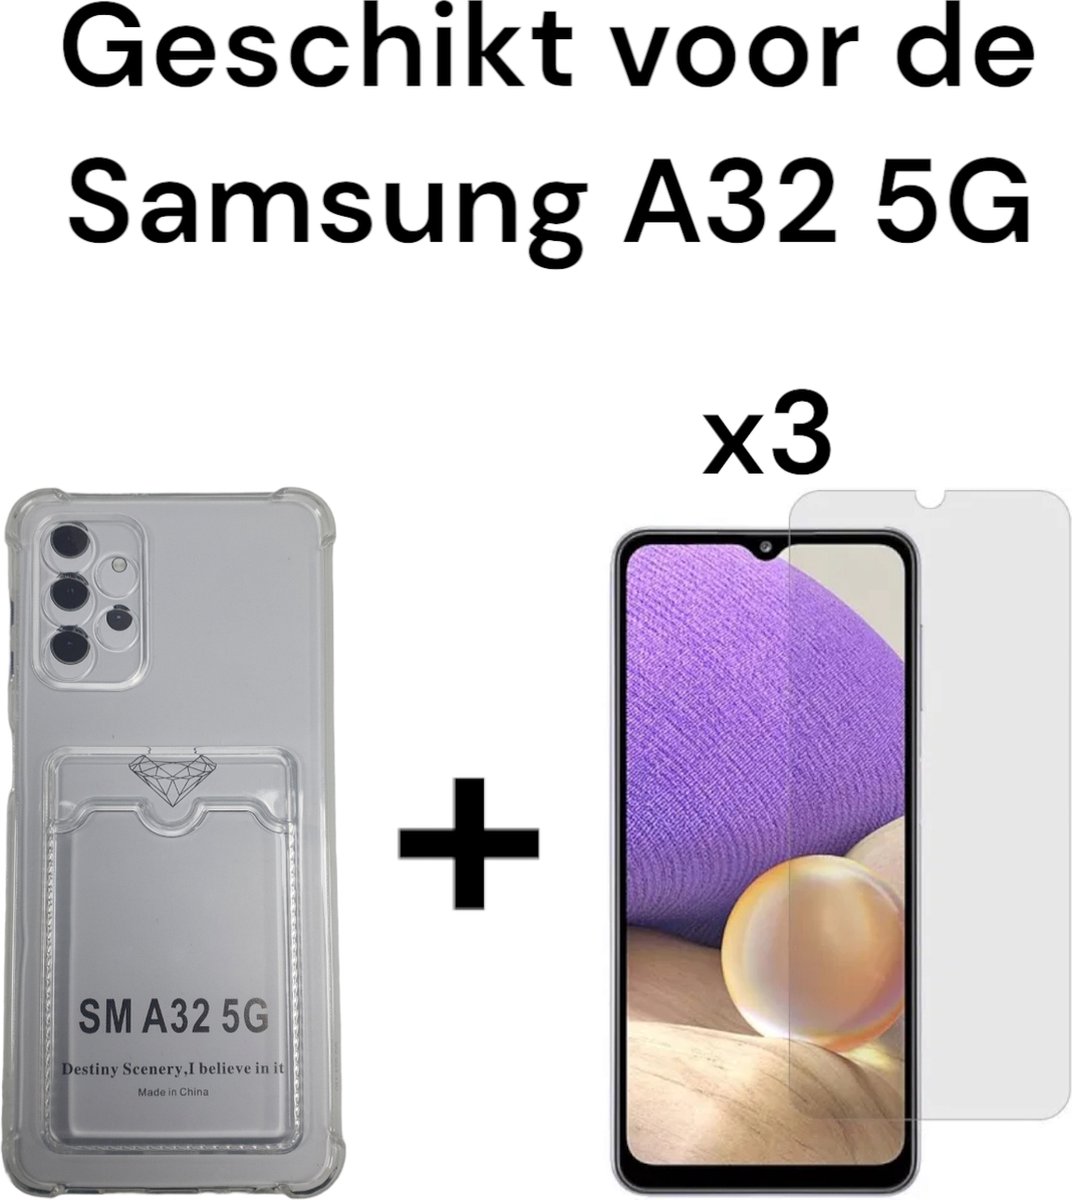 samsung a32 5G siliconen transparant hoesje antischok met pashouder + 3x screen protector samsung galaxy a32 5G antishock backcover doorzichtig achterkant with card holder + 3x tempered glas